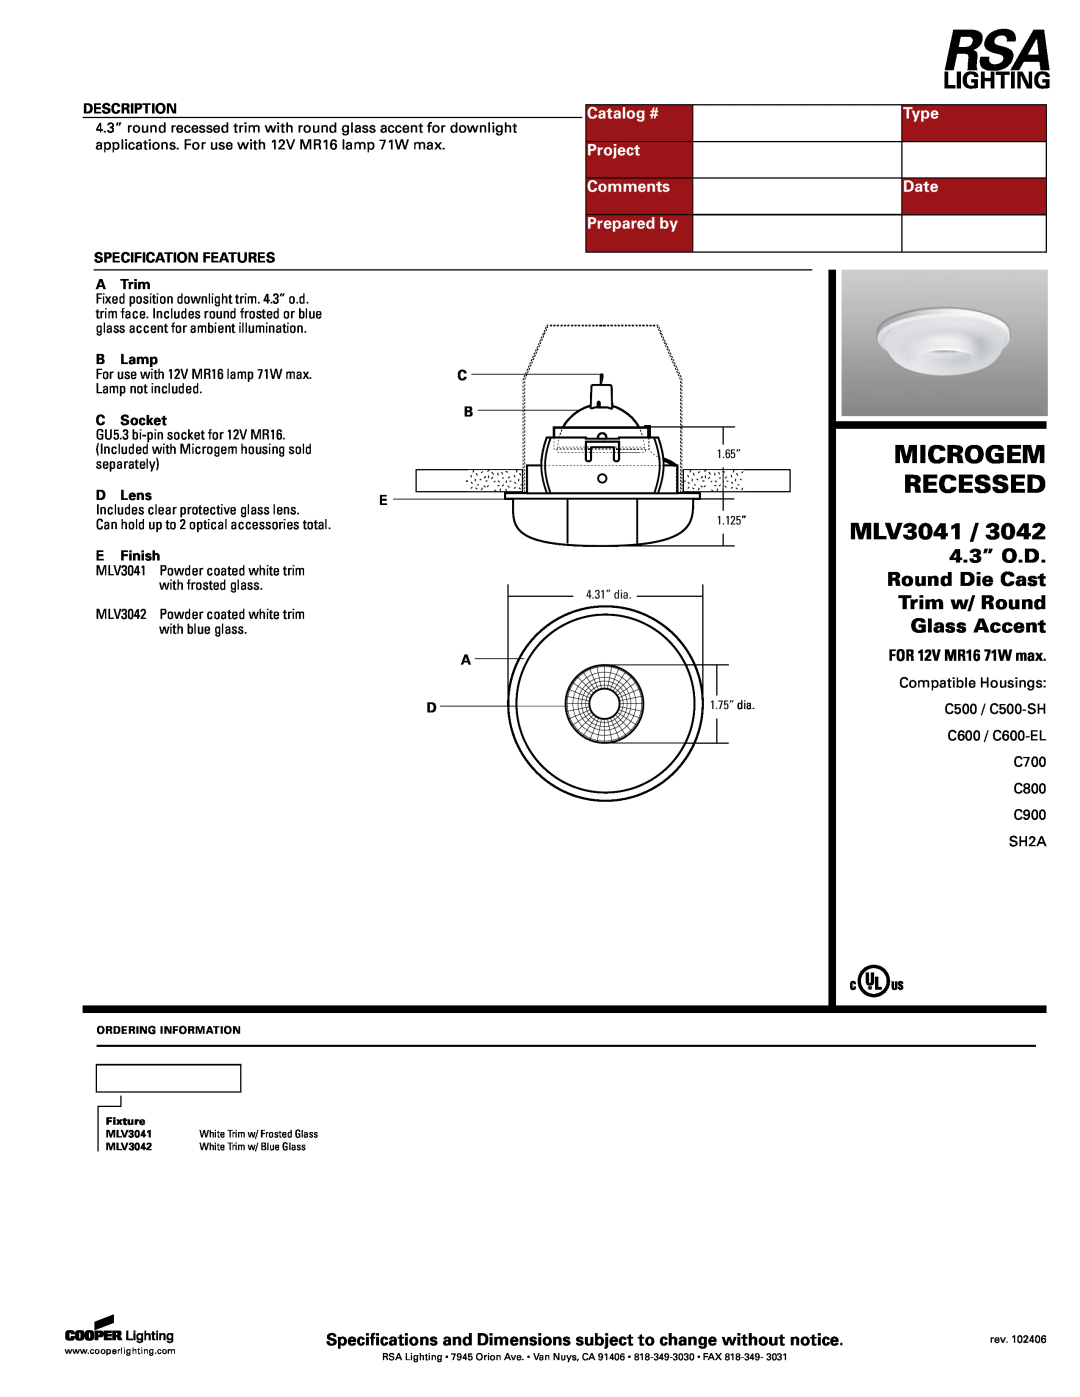 Cooper Lighting MLV3041 specifications Microgem, Recessed, 4.3” O.D, Round Die Cast, Trim w/ Round, Glass Accent, Type 